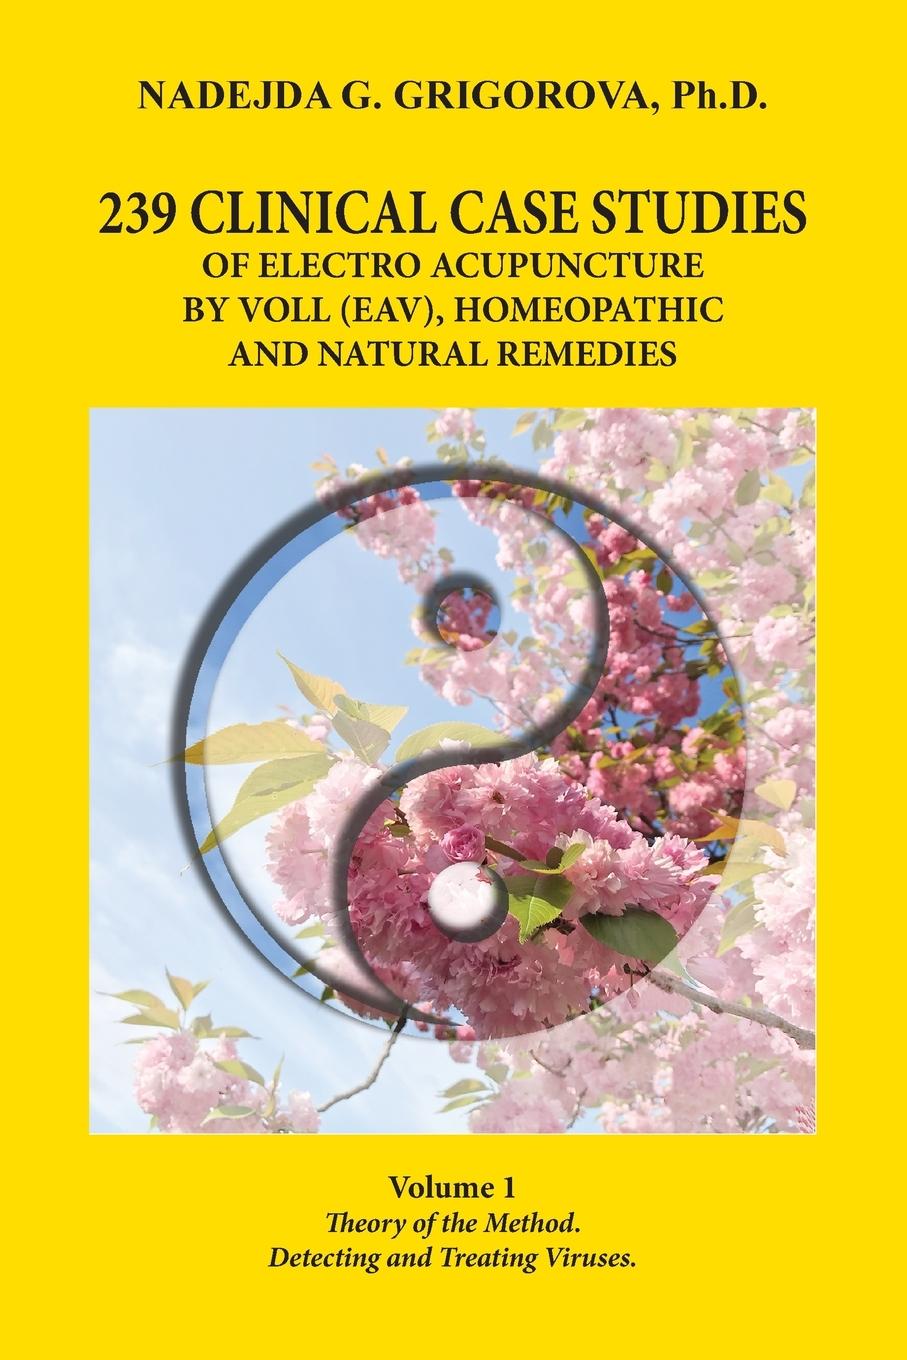 Könyv 239 Clinical Case Studies of Electro Acupuncture by Voll (Eav), Homeopathic and Natural Remedies Grigorova Nadejda G. Grigorova